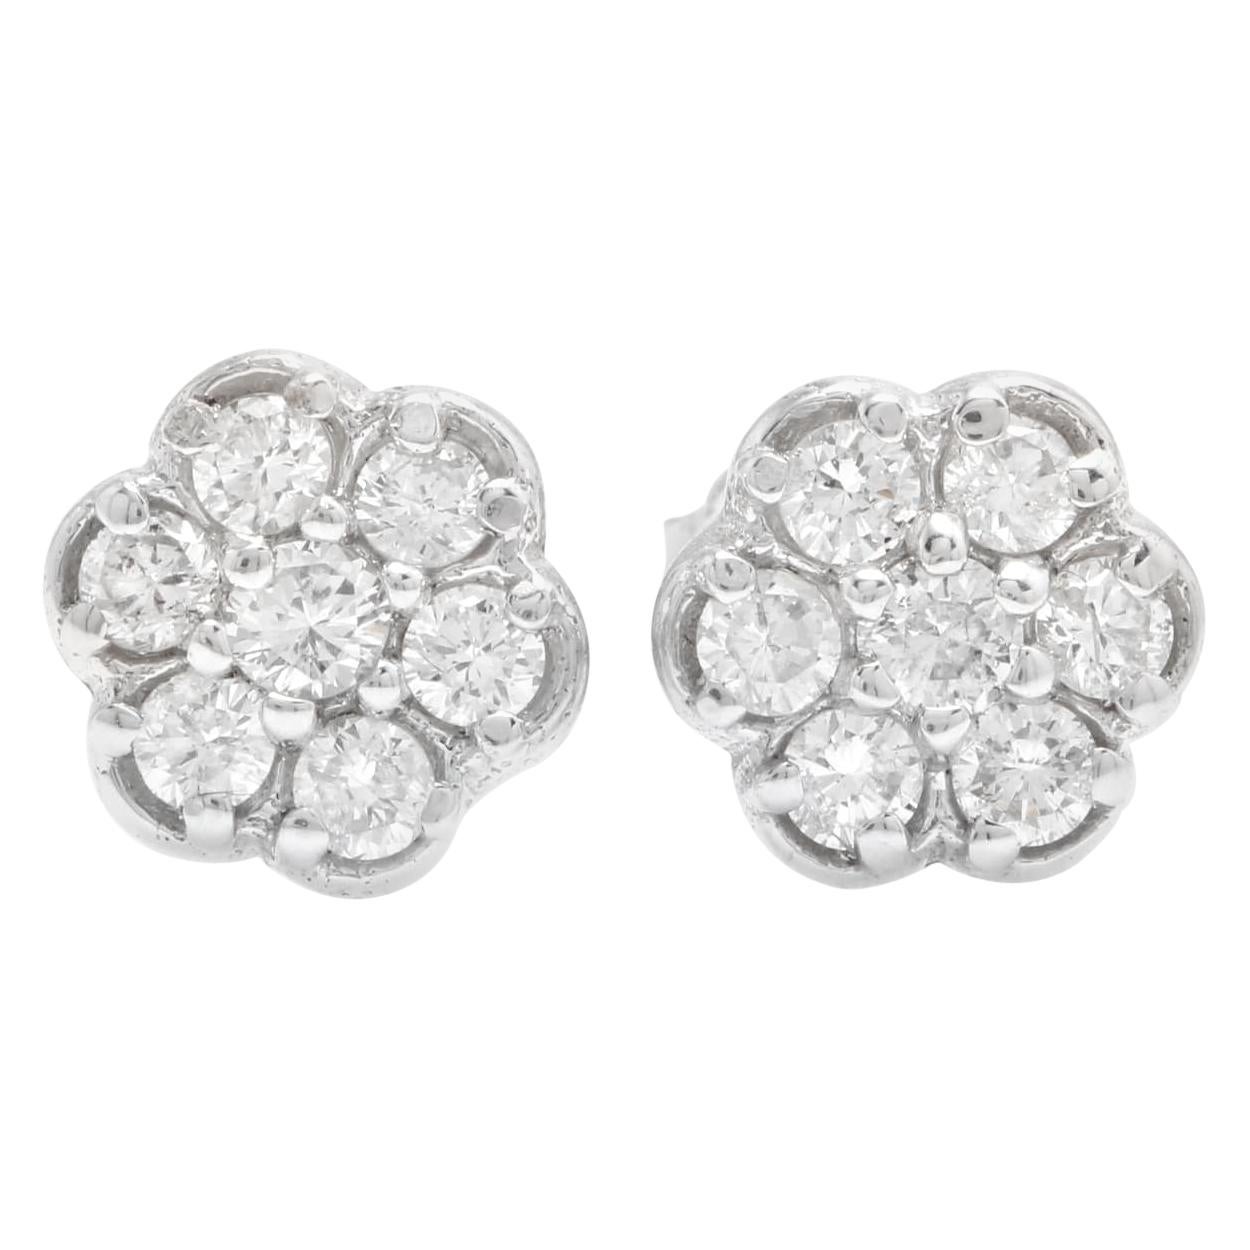 Exquisite 0.45 Carat Natural Diamond 14 Karat Solid White Gold Stud Earrings For Sale